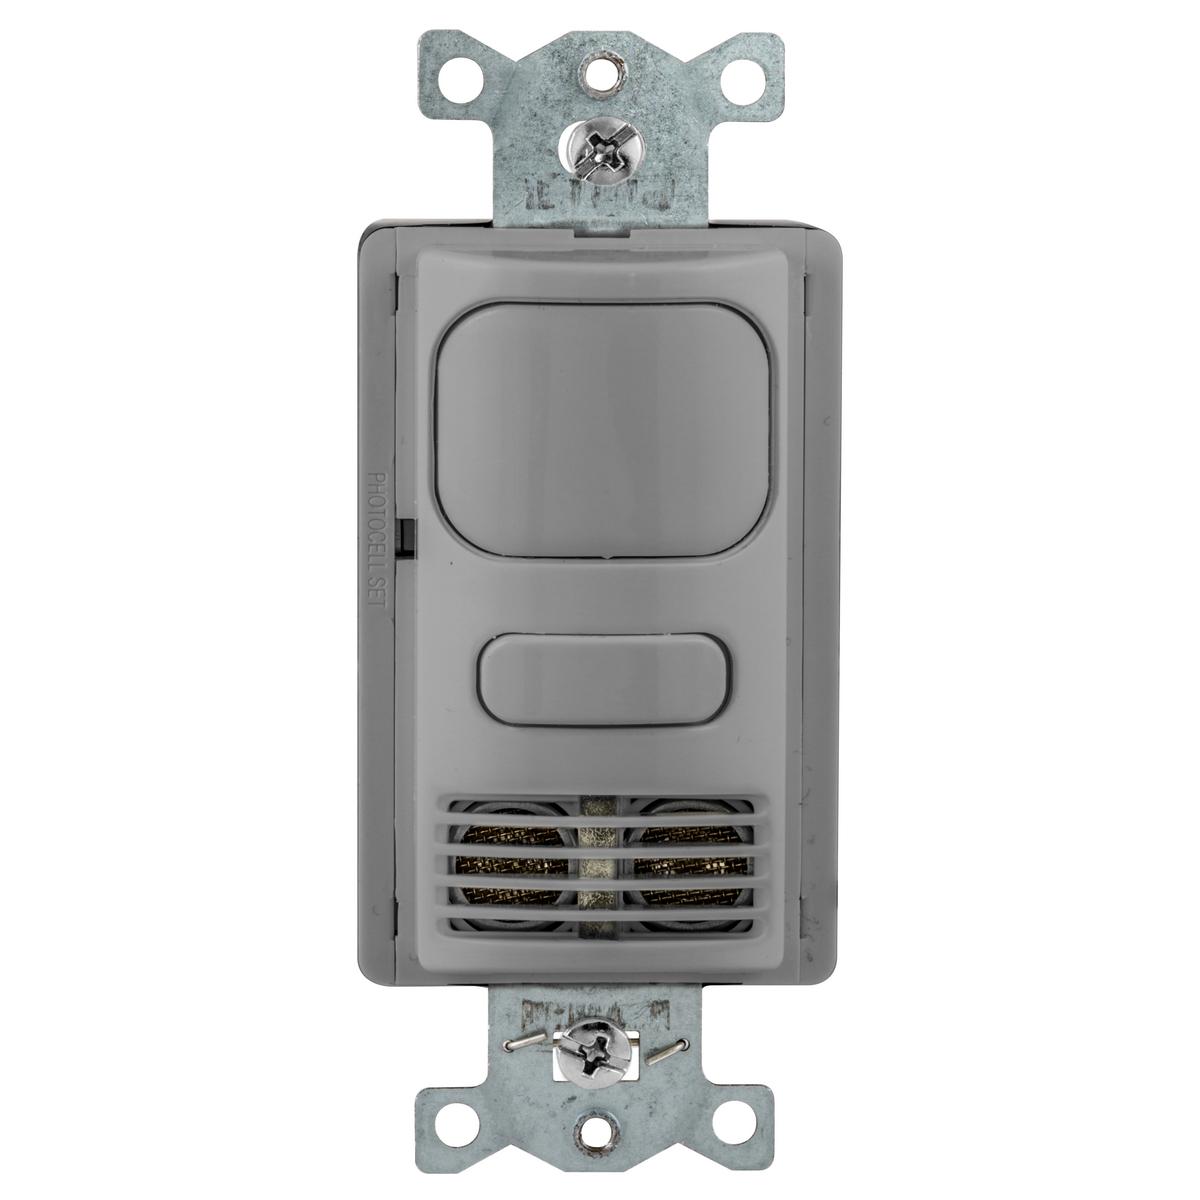 Hubbell MSD2001GY1 Occupancy Sensing Products, Wall Switch, Occupancy or Vacancy, Dual Tech, 1 Relay, 1000 Square Feet, 800W Incandescent, 1000W Fluorescent @ 120V AC, 1800W  Fluorescent @ 277V 